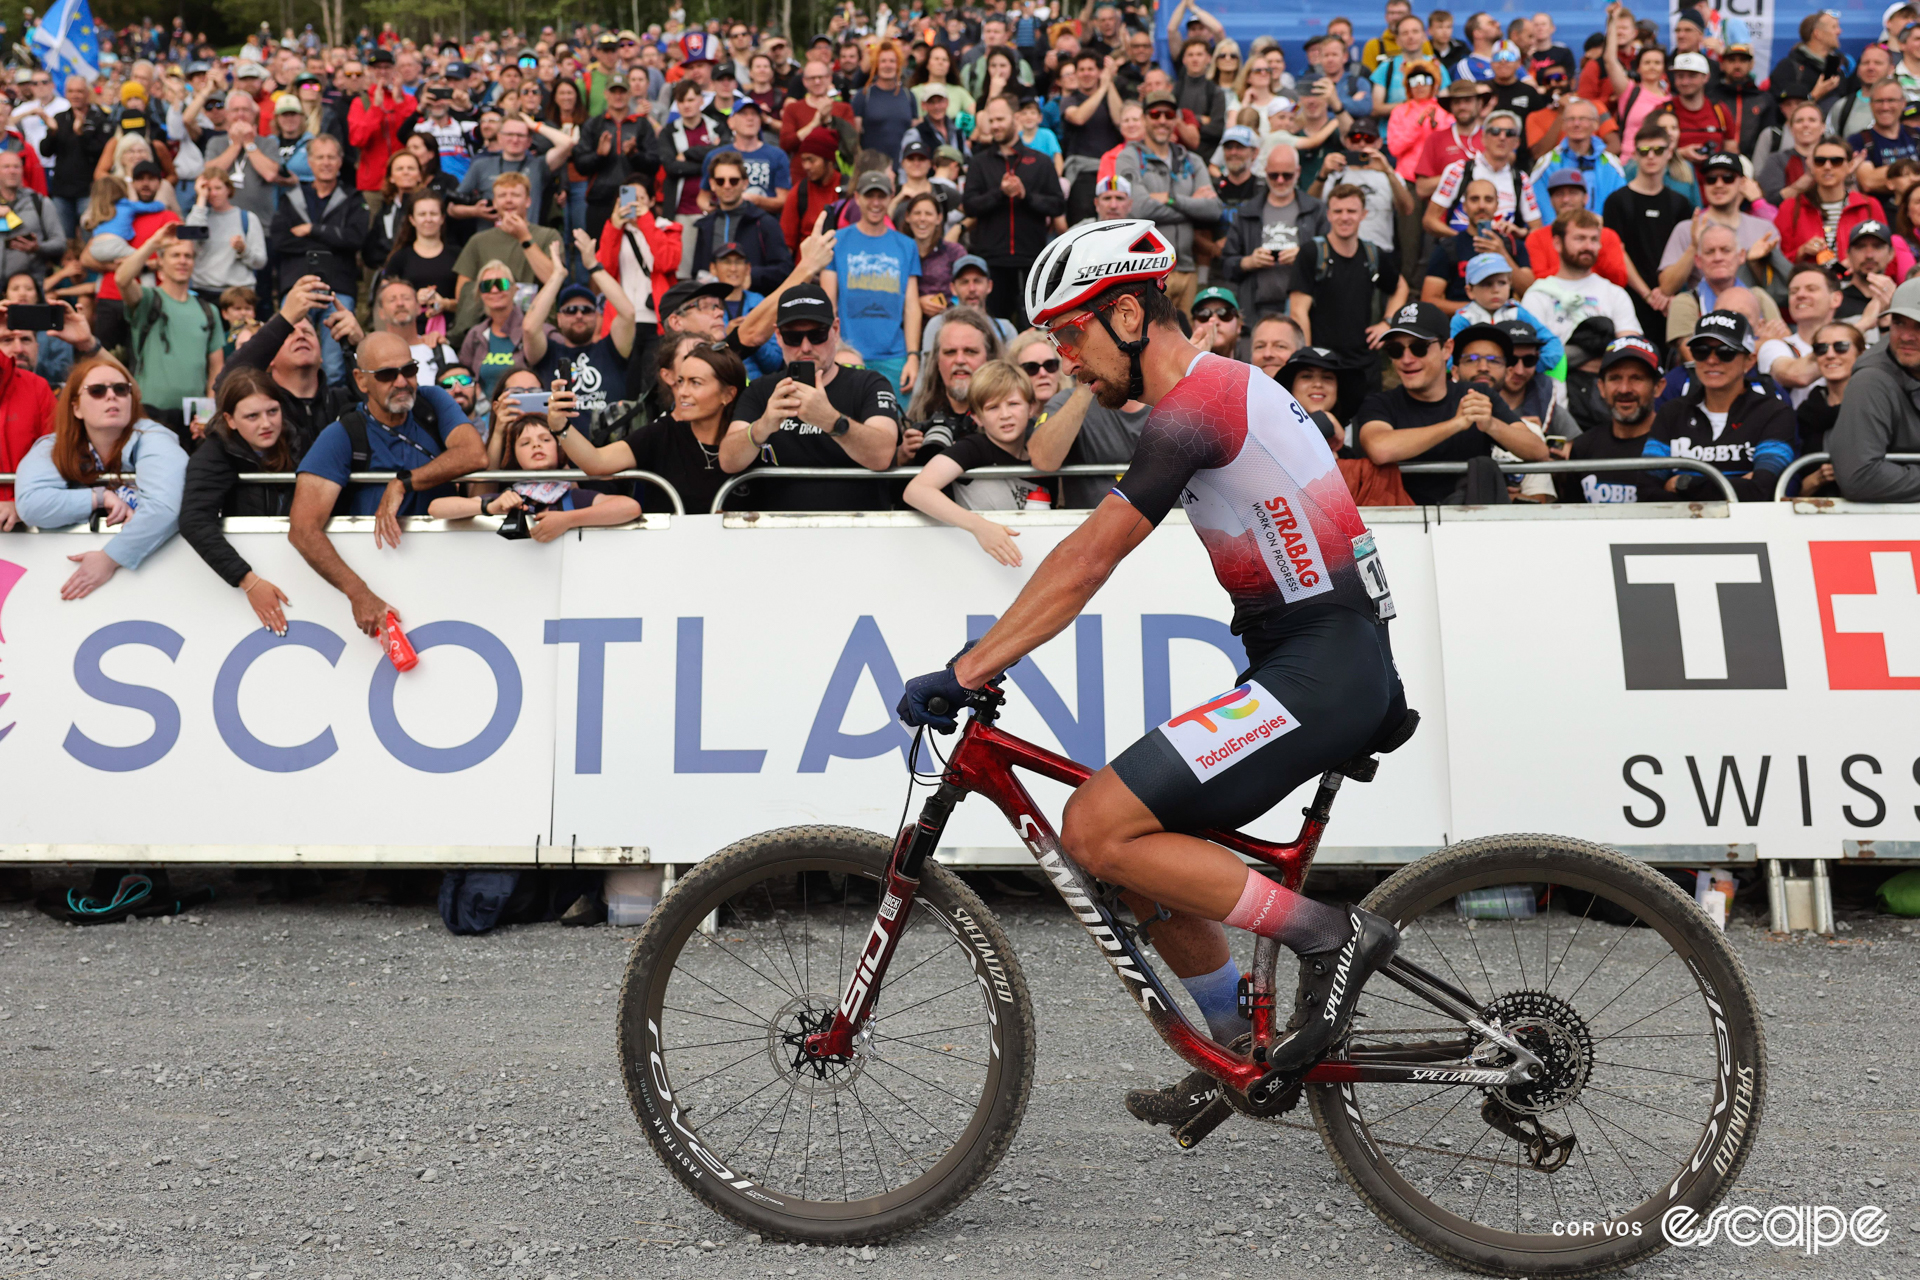 Peter Sagan sits on his mountain bike at the 2023 MTB Worlds in Glasgow with a large crowd behind him.